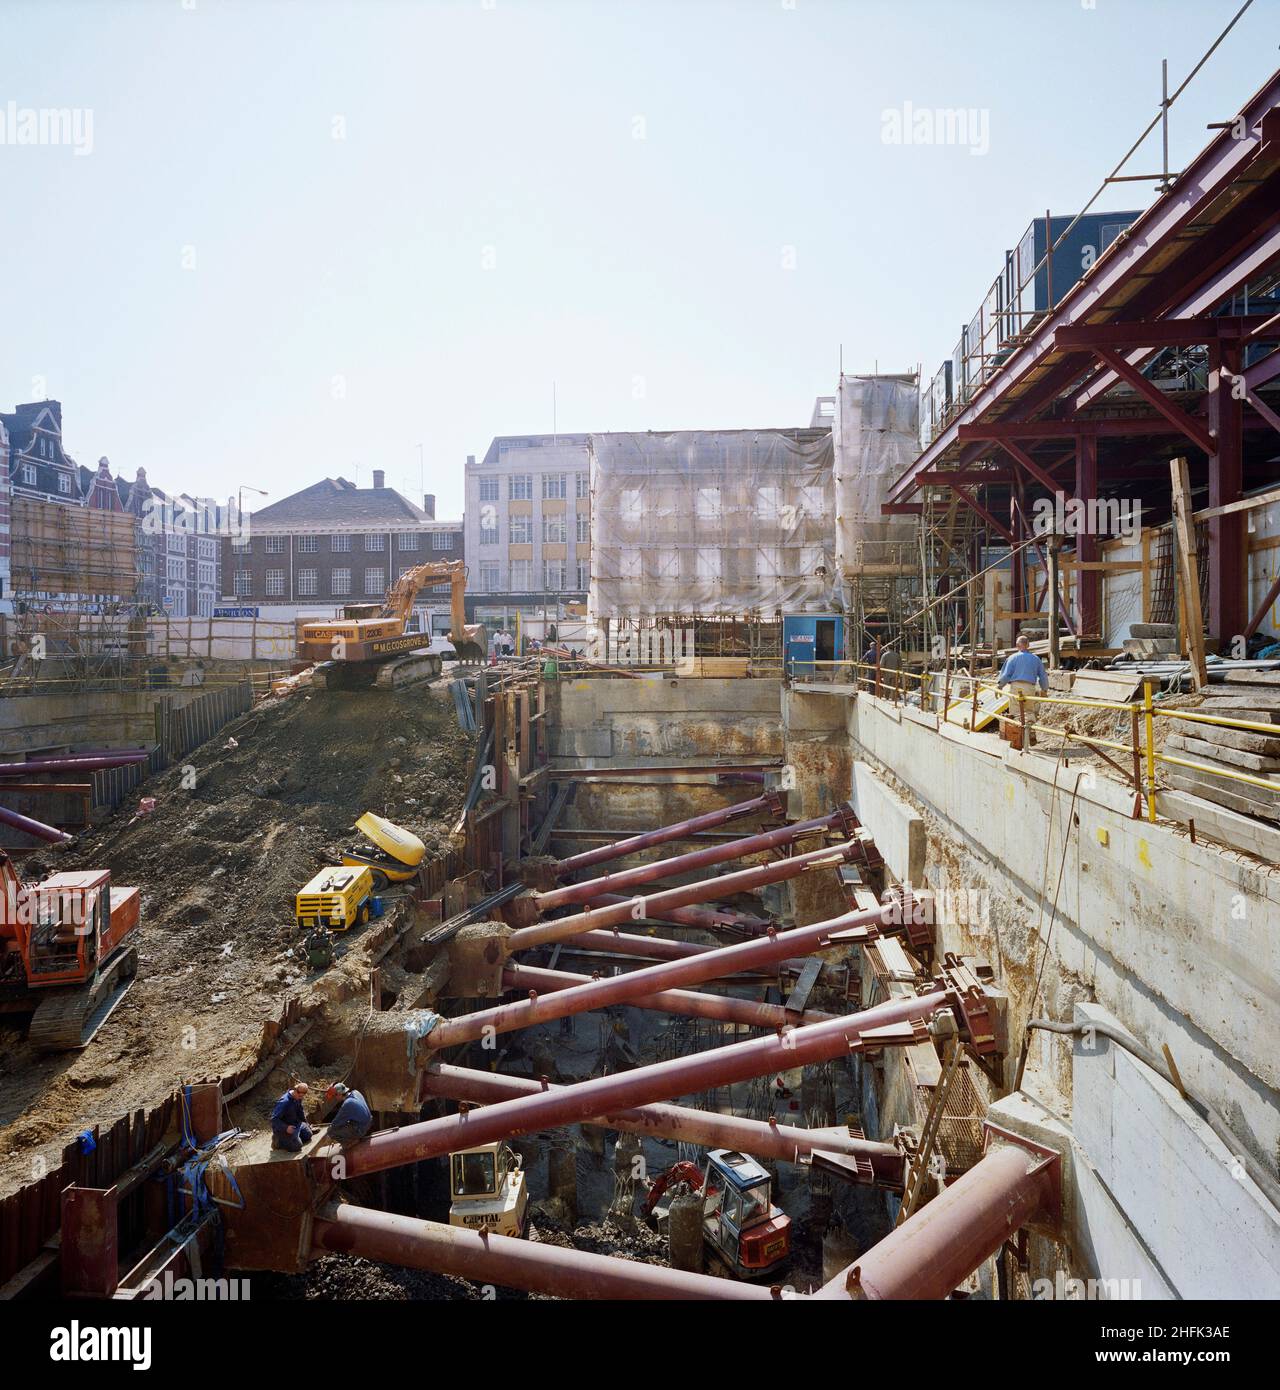 London Metropole Hotel, Edgware Road, City of Westminster, London, 09/05/1989. Temporary steel bracing struts are in place to support the externals walls whilst the basement levels are excavated at the extension to the Metropole Hotel, London. Stock Photo